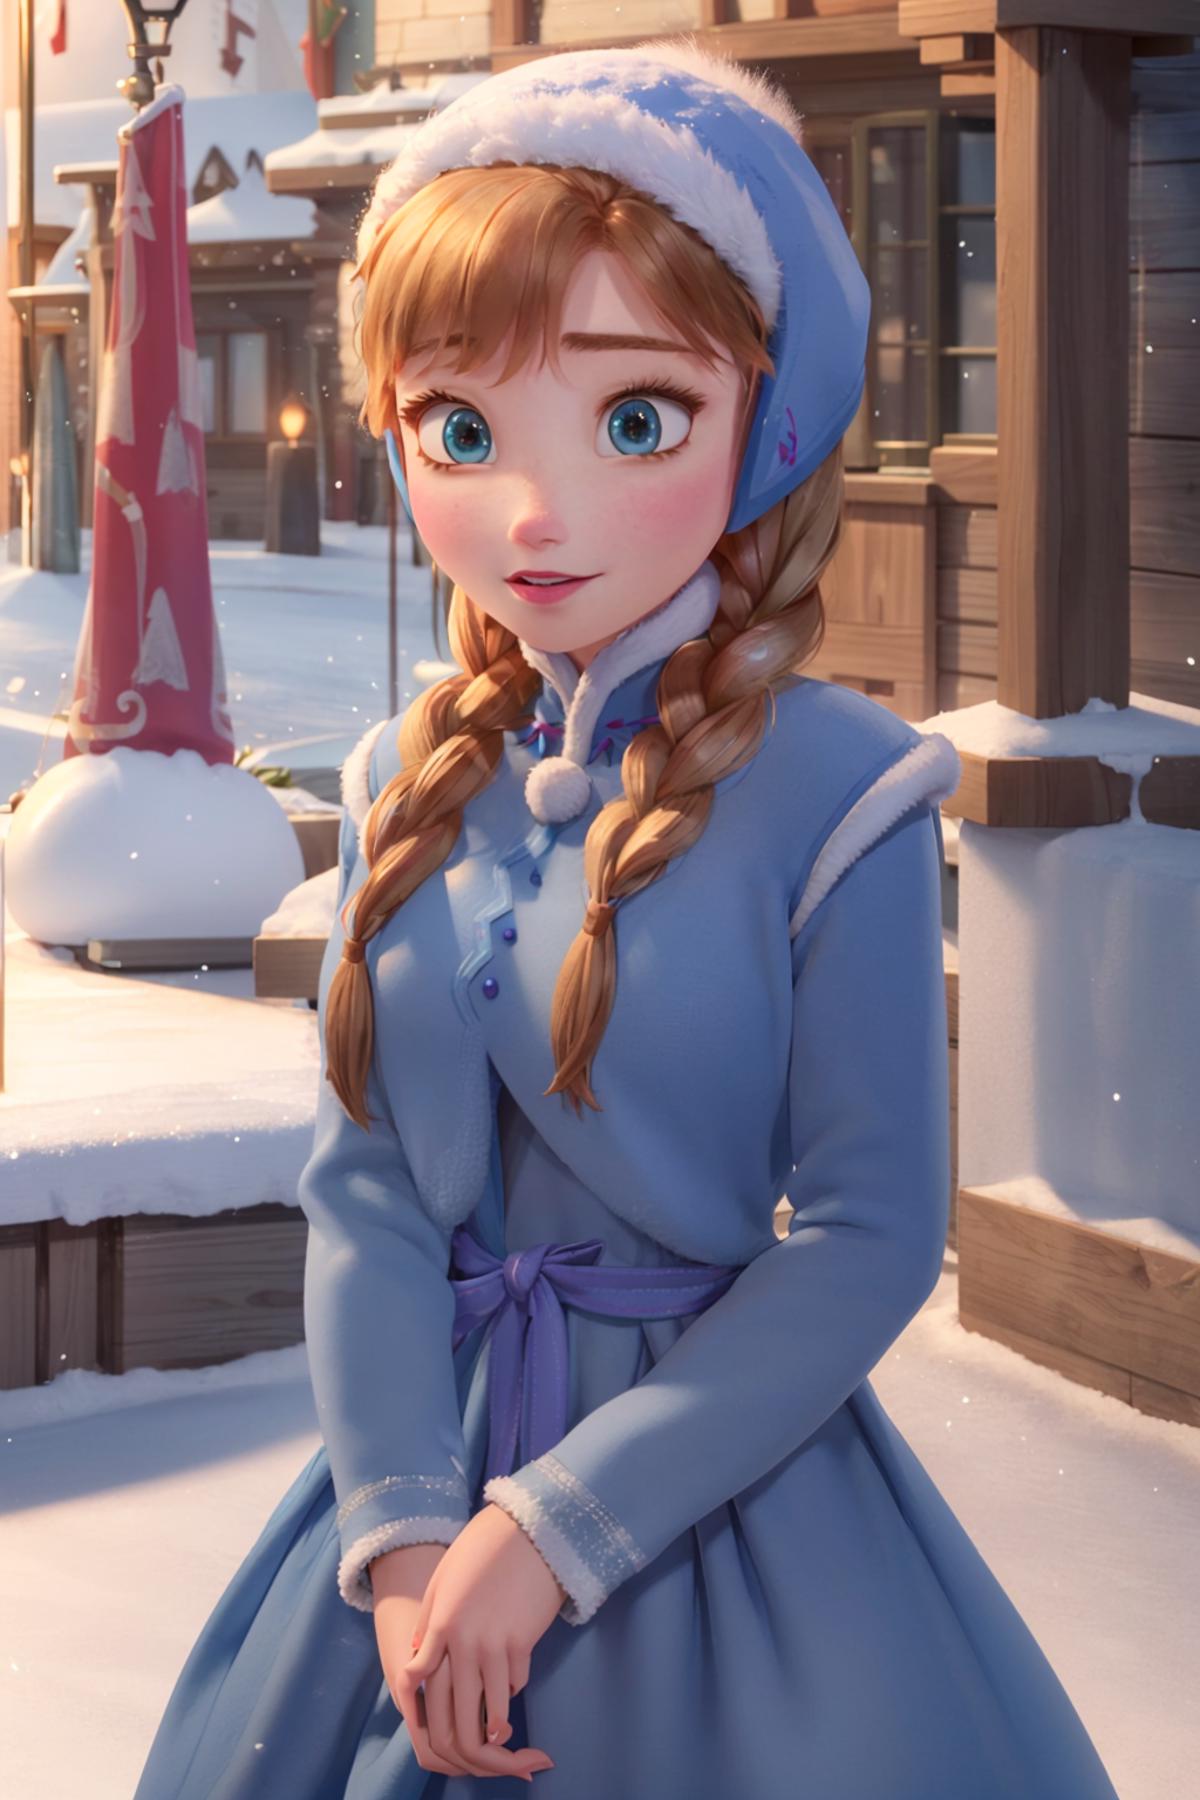 Frozen - Anna image by chrgg